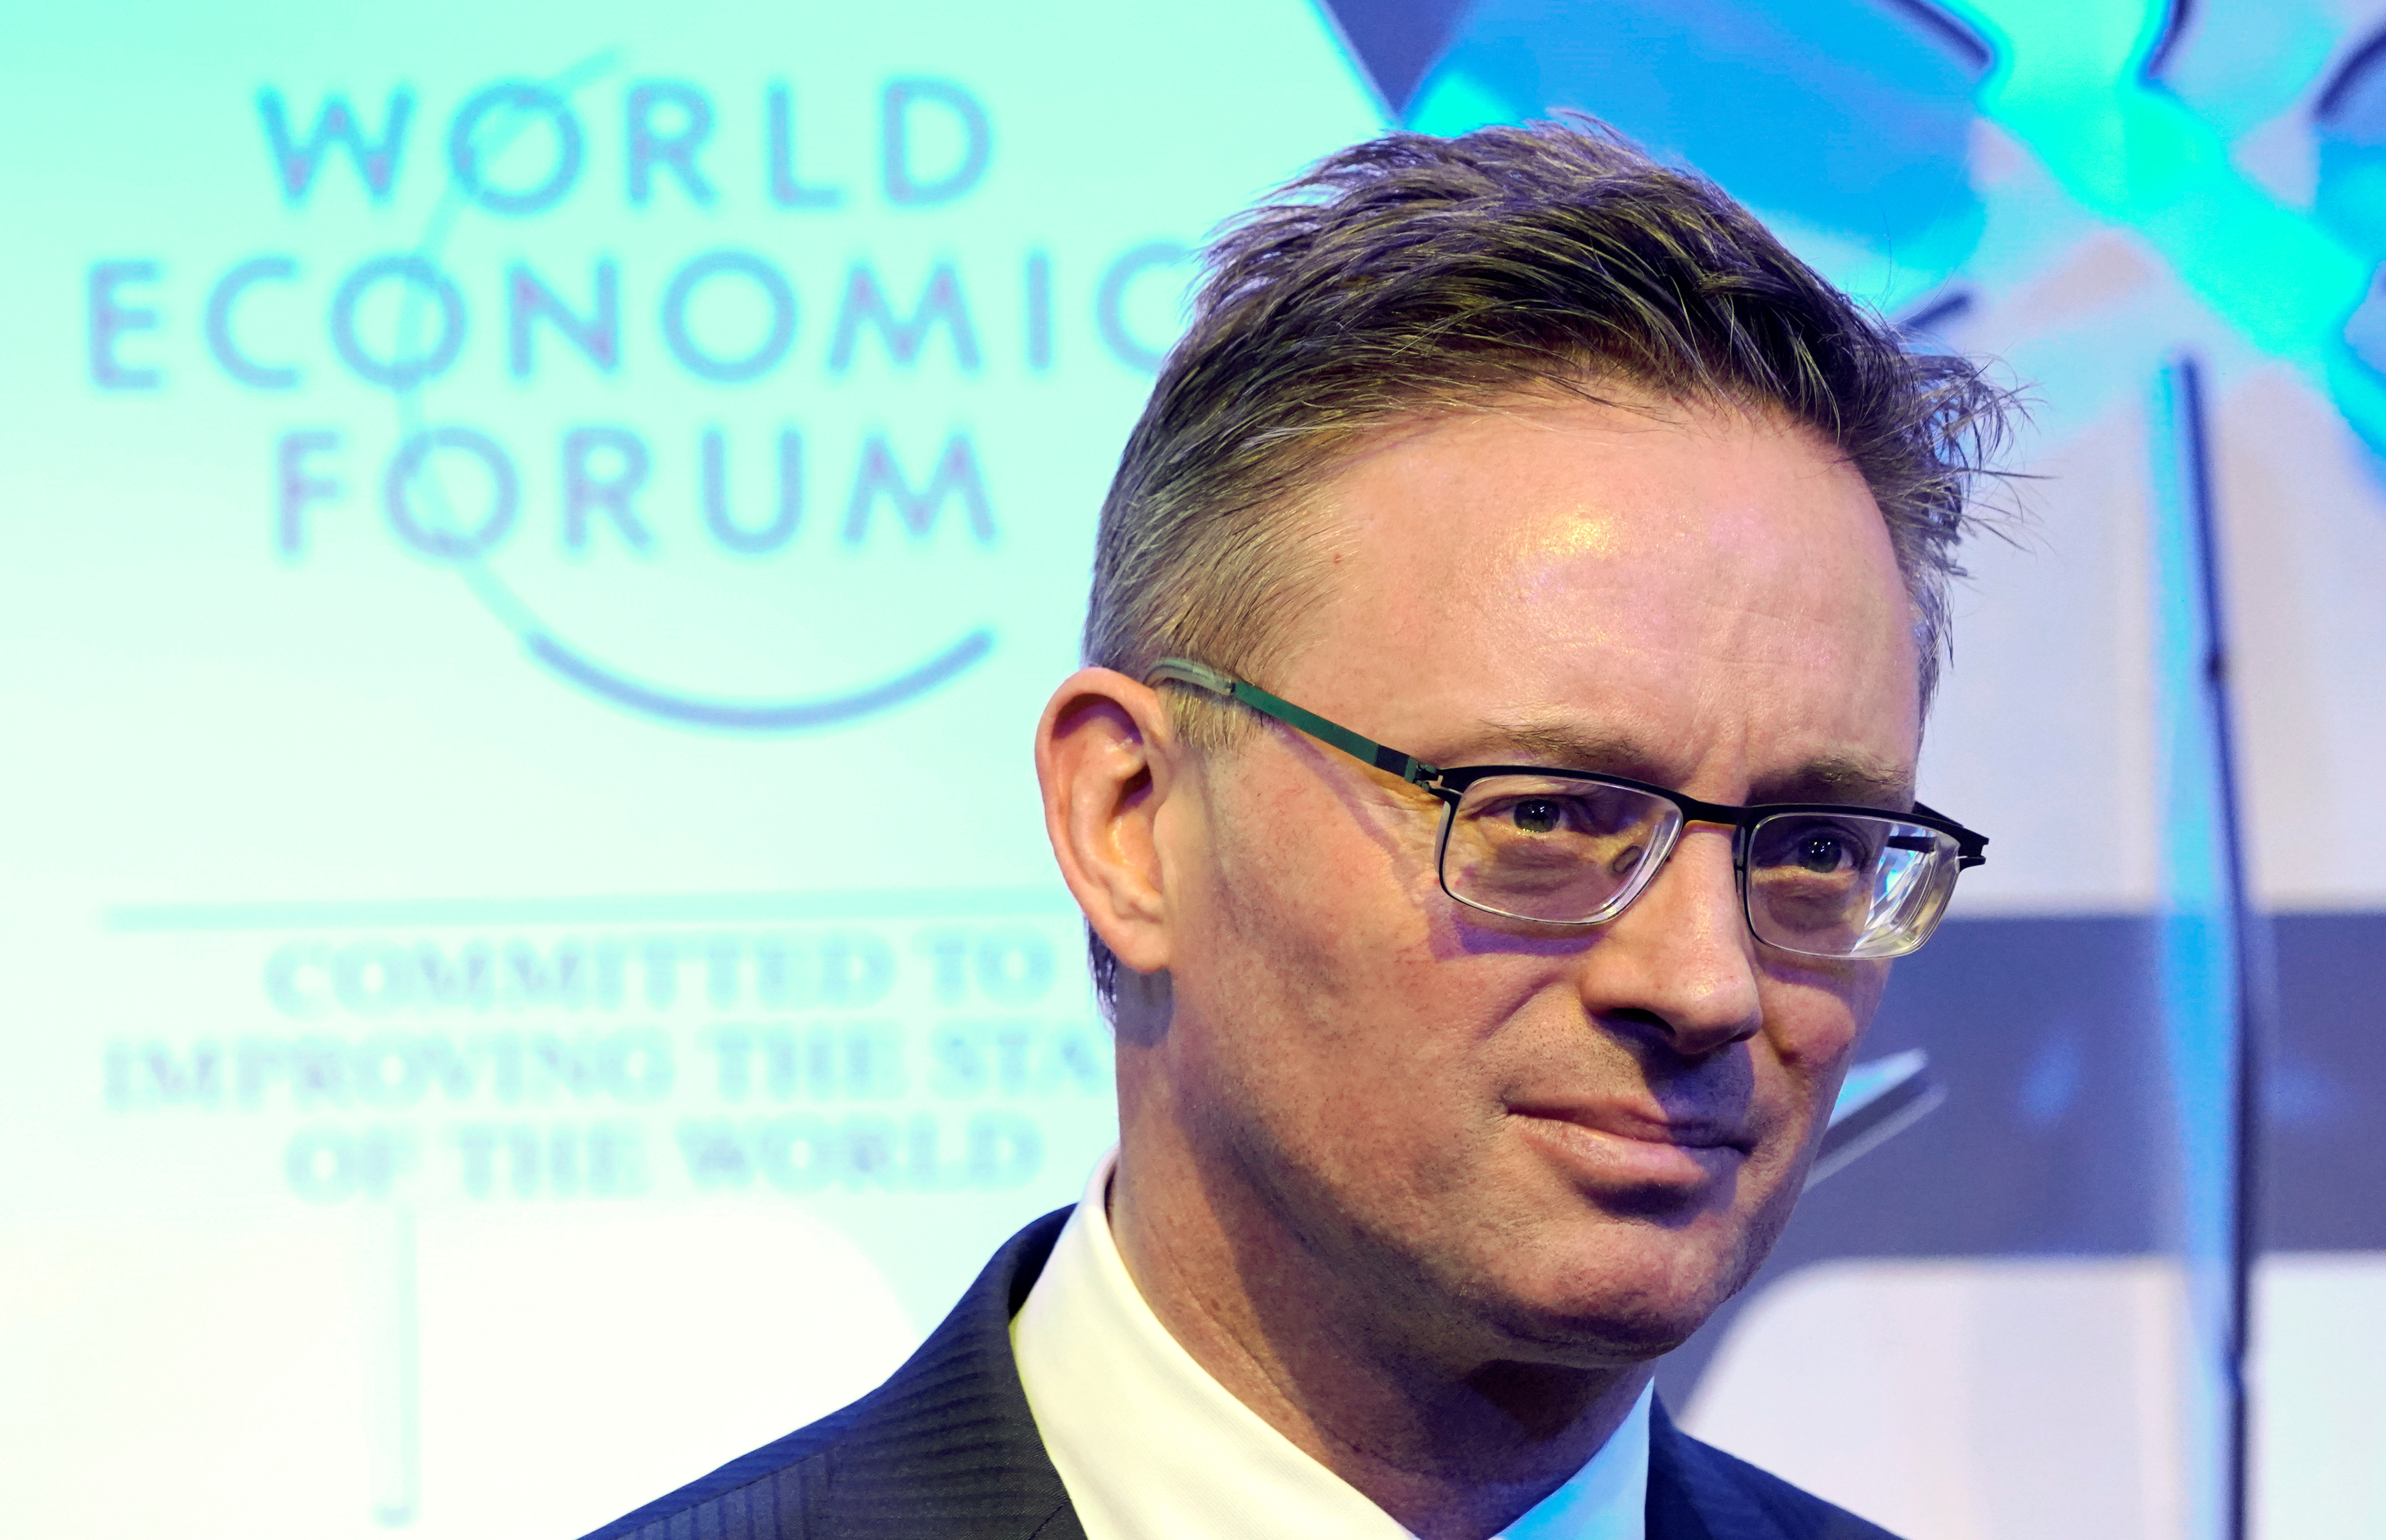 Jeremy Weir, Chief Executive Officer of Trafigura Group, attends the World Economic Forum (WEF) annual meeting in Davos, Switzerland January 23, 2018  REUTERS/Denis Balibouse